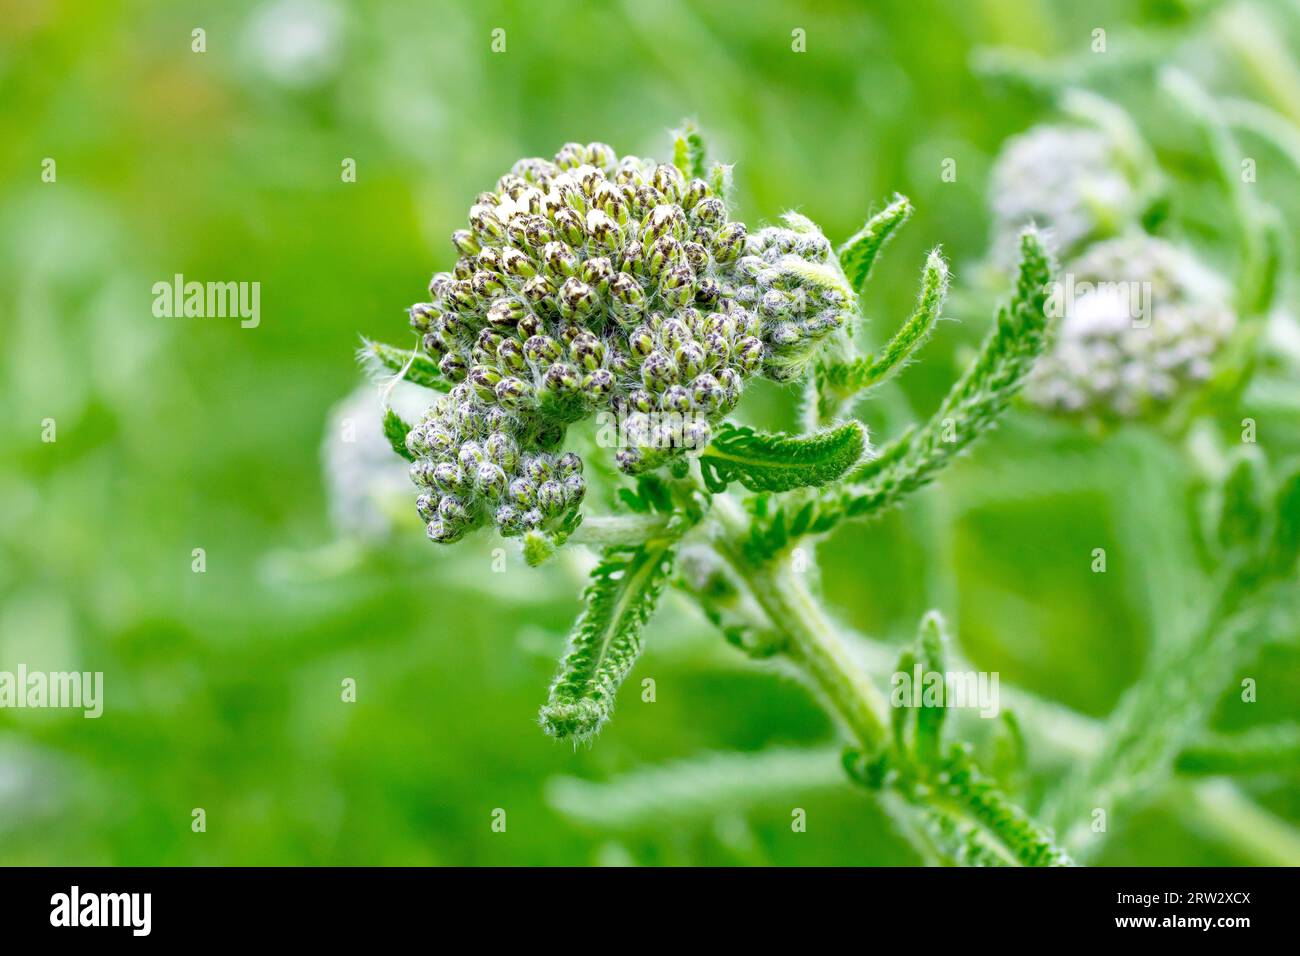 Yarrow (achillea millefolium), close up showing the flowerbuds on the plant and the finely cut leaves opening on the stems. Stock Photo